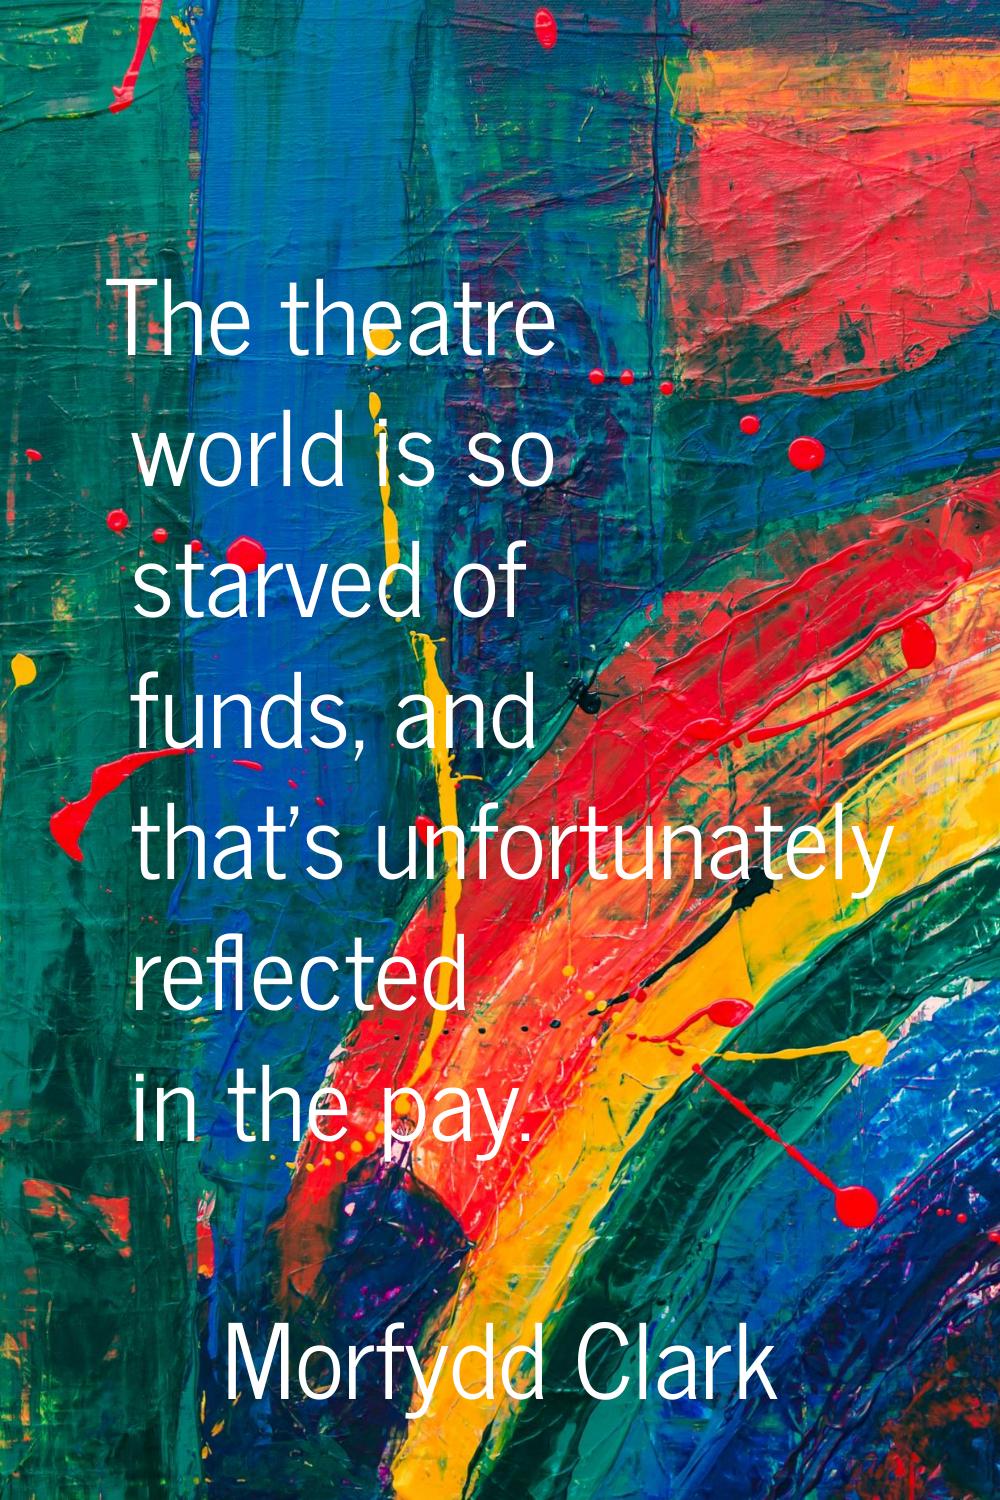 The theatre world is so starved of funds, and that's unfortunately reflected in the pay.